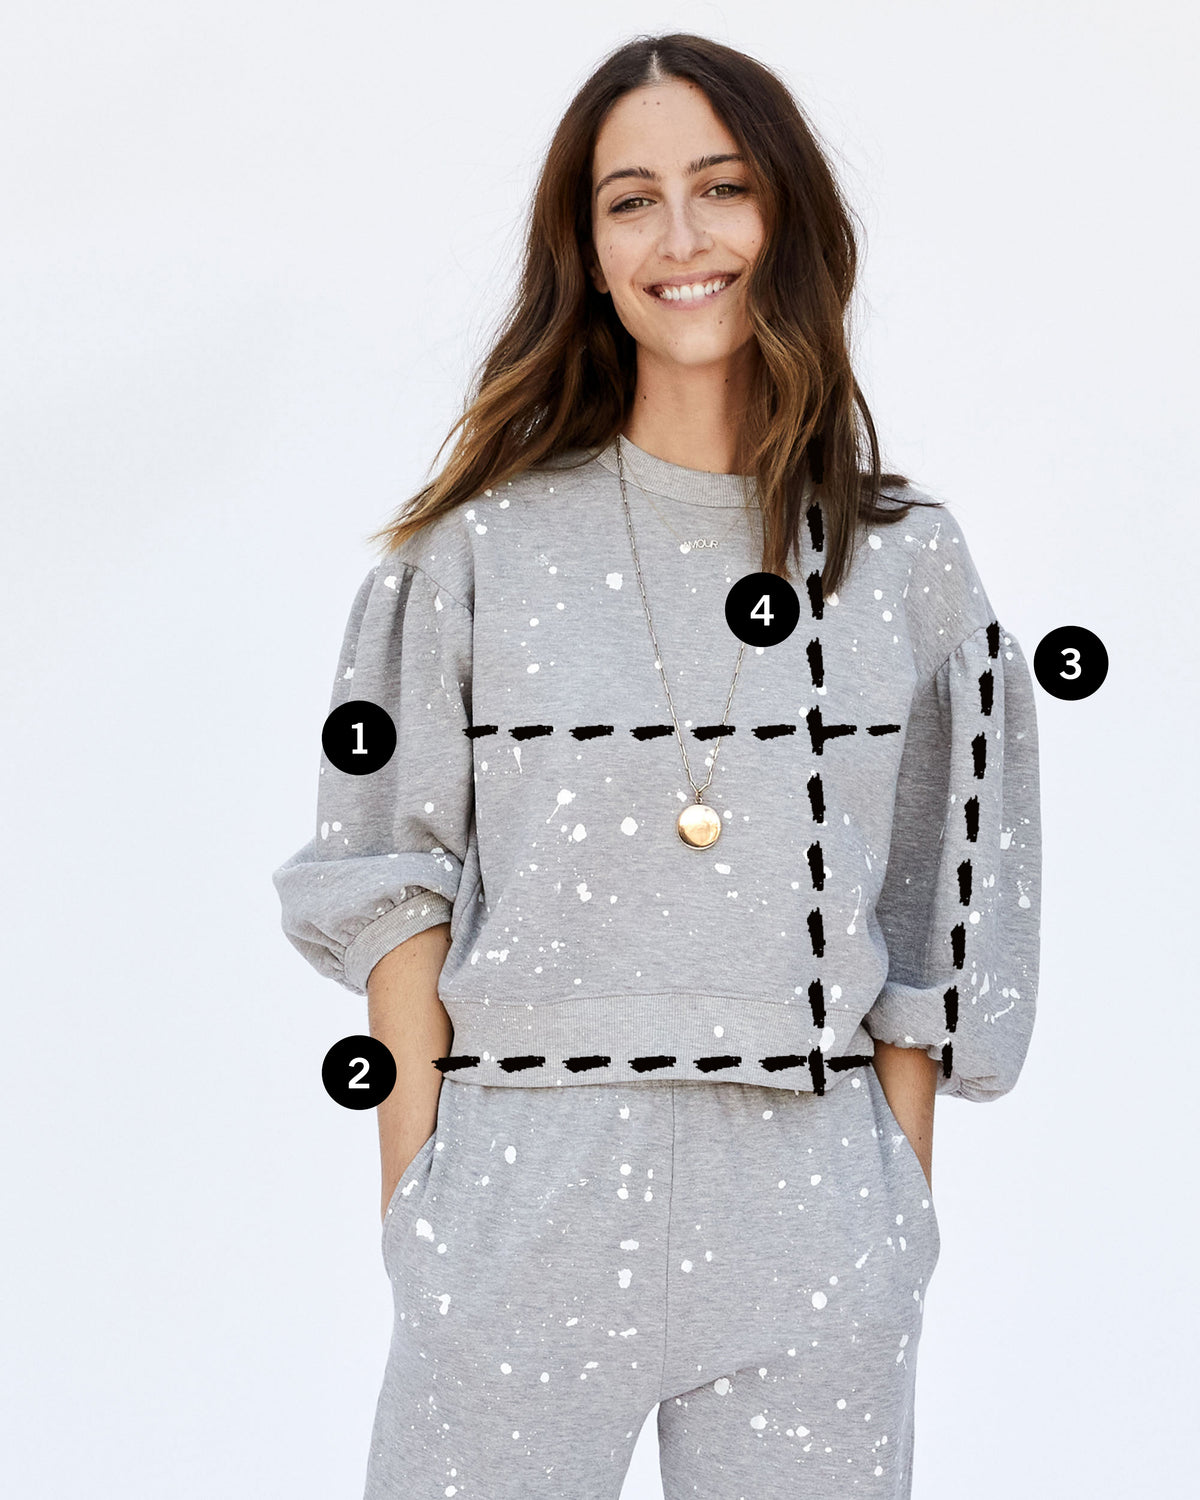 image of Frannie in a grey sweatshirt with 4 lines depicting where the user should measure for their bust, sweep, sleeve and length measurements in comparison to the garment